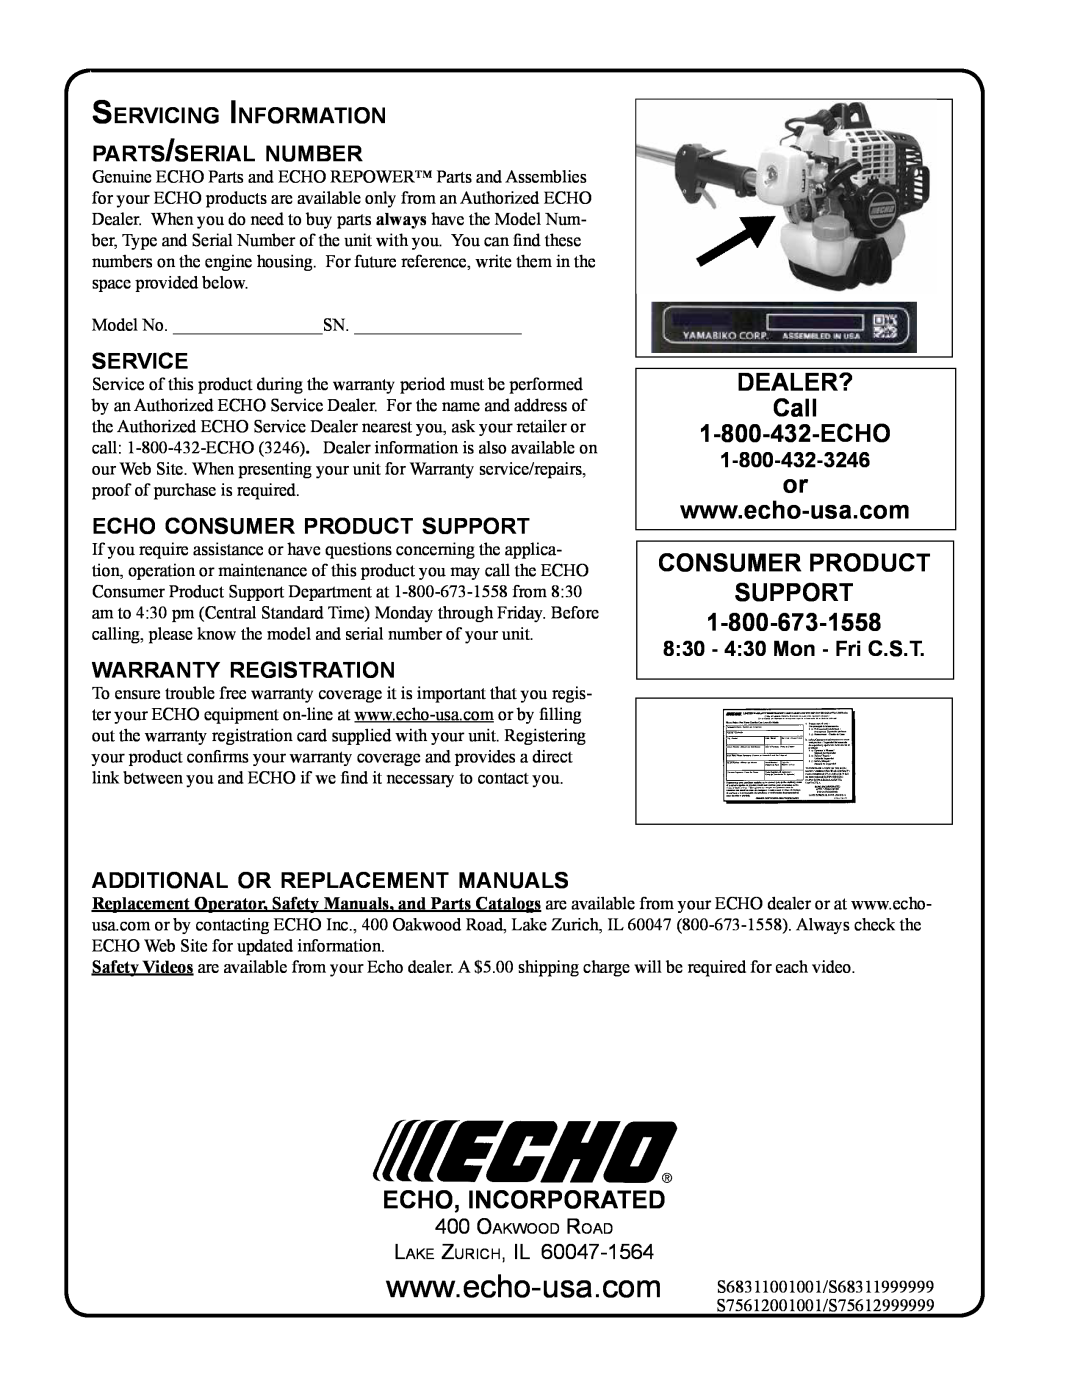 Echo PE-230 DEALER? Call 1-800-432-ECHO, Consumer Product Support, Echo, Incorporated, service, warranty registration 